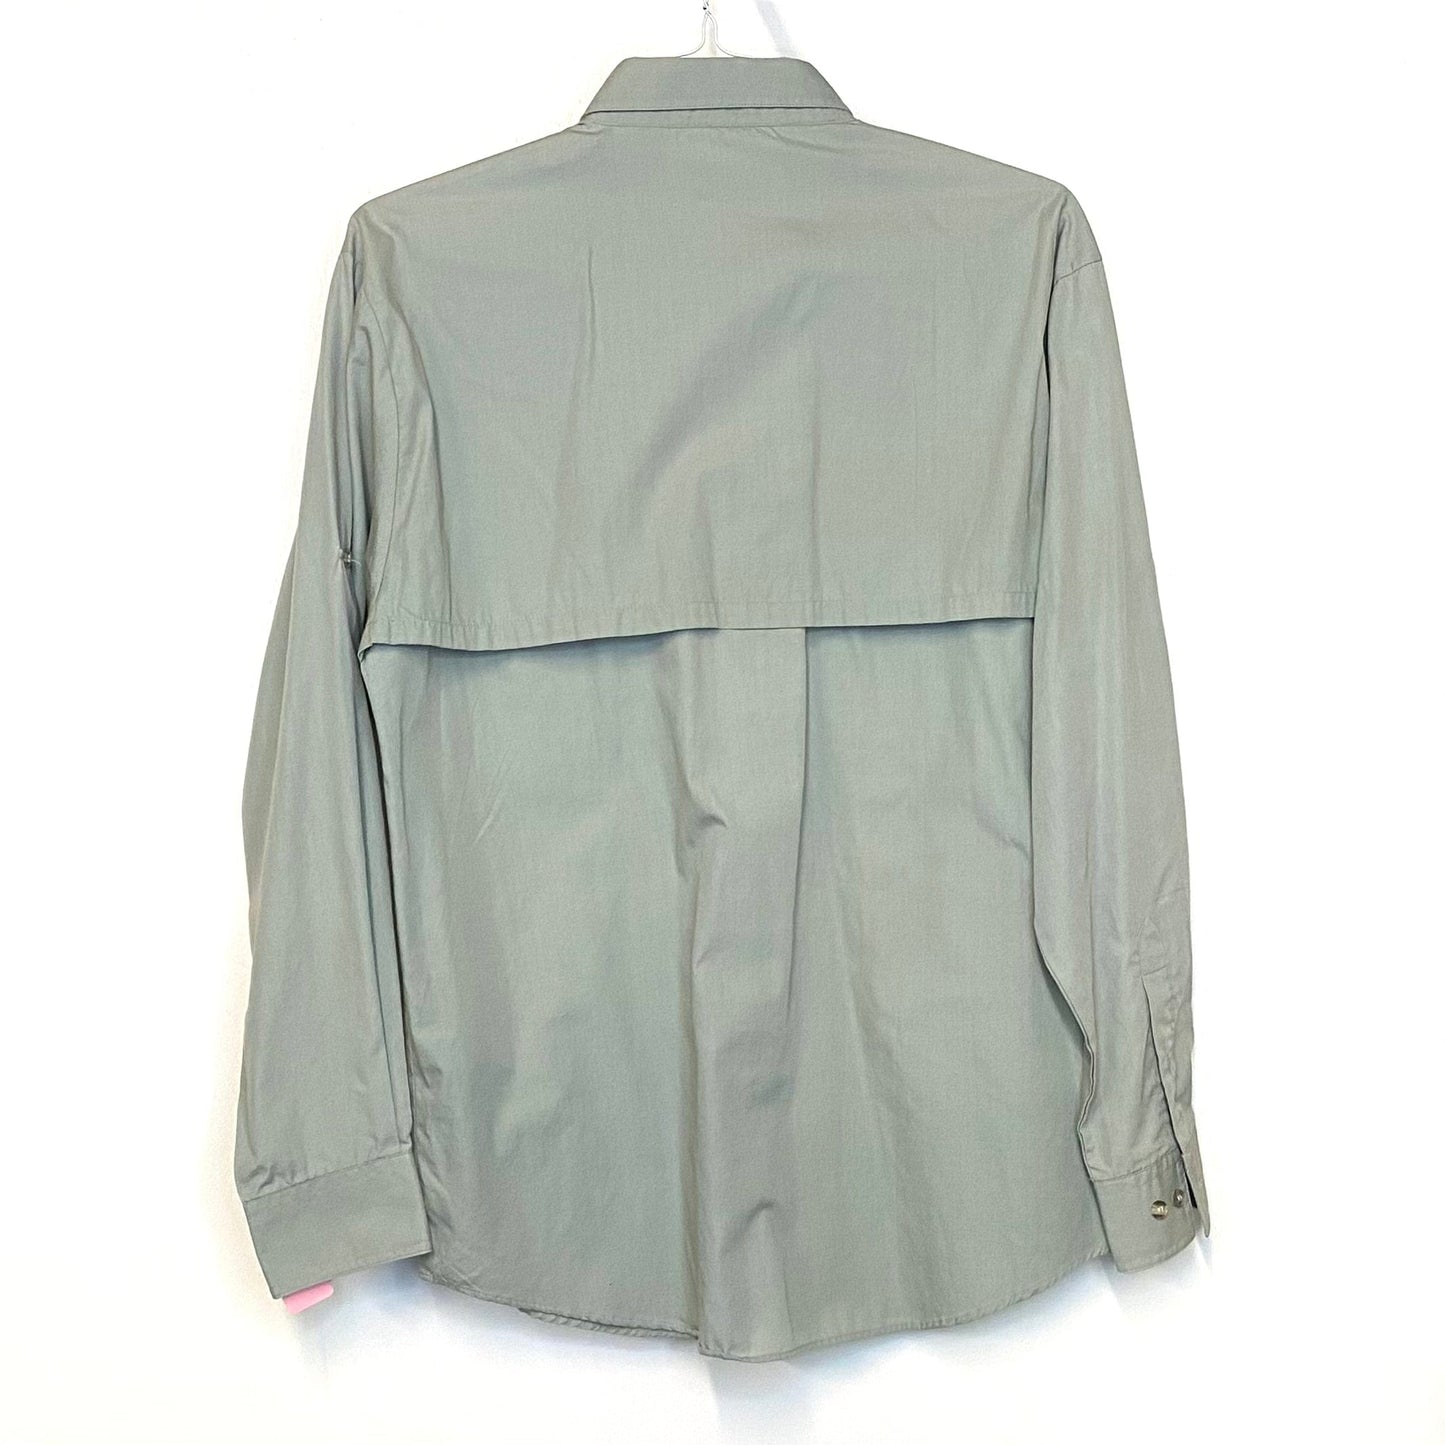 Haband Mens Size M Green Lightweight Vented Shirt Button-Up L/s